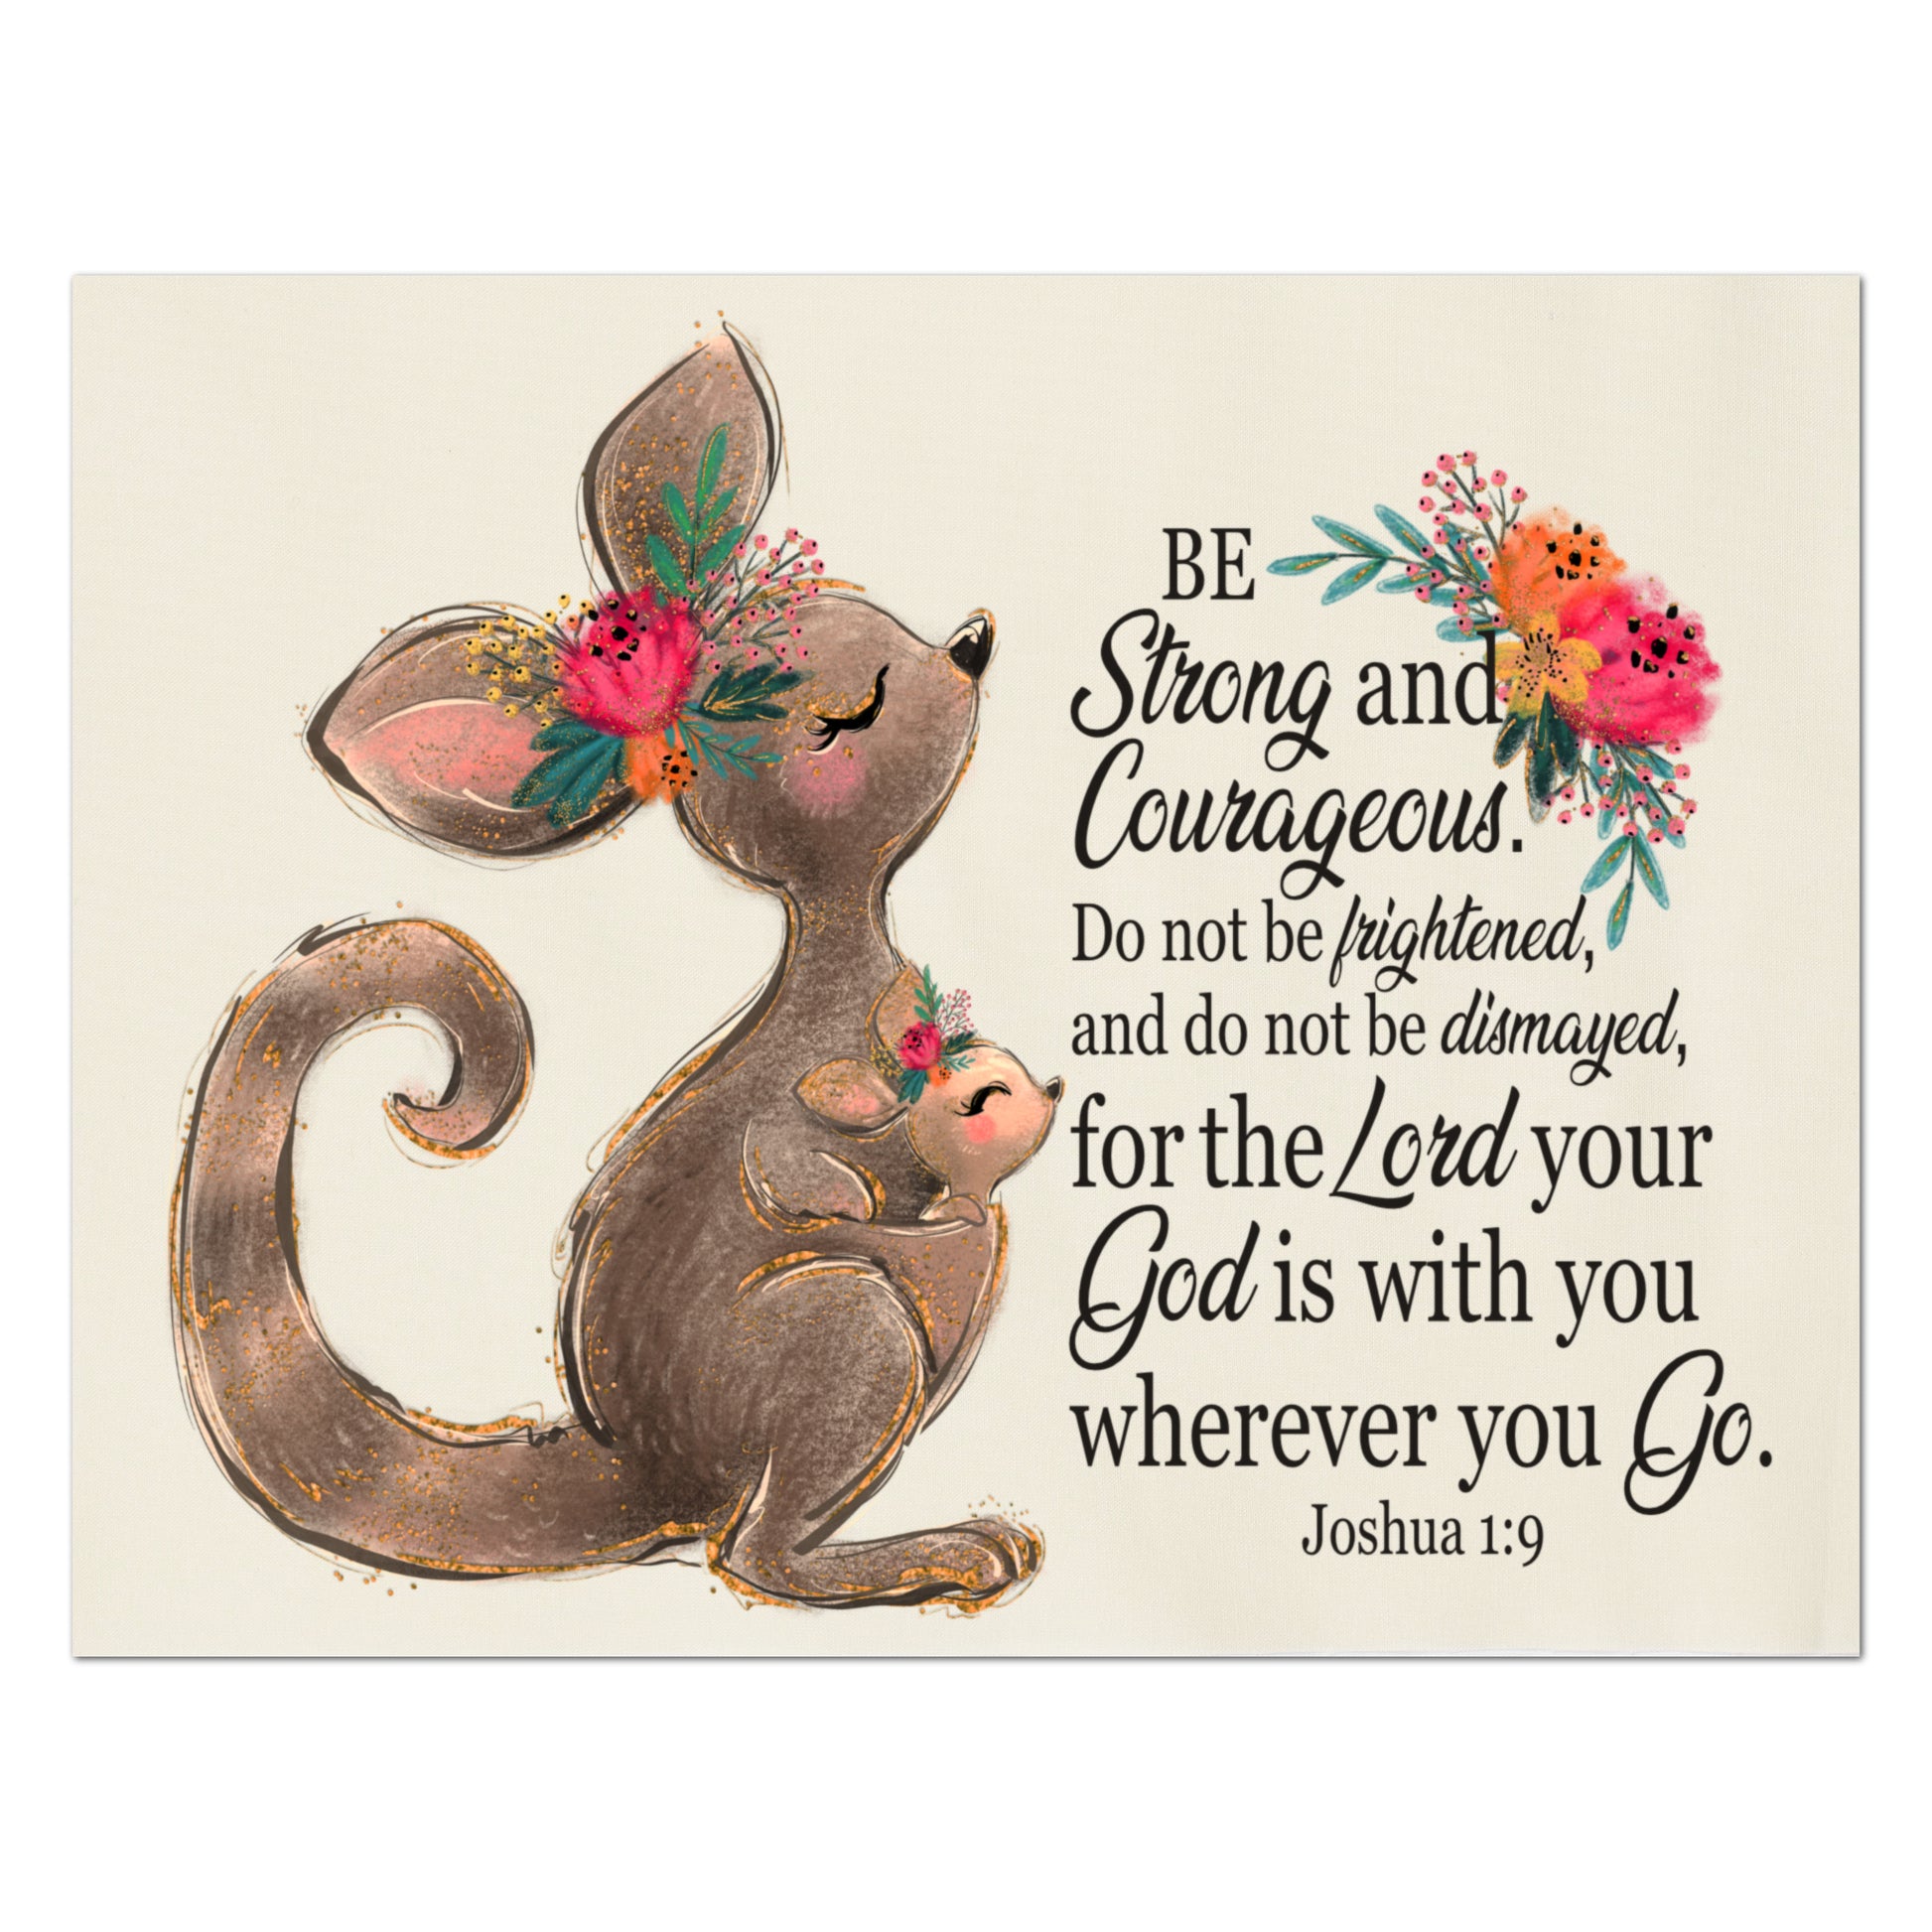 Baby Fabric Panels - Be Strong and Courageous, do not be frightened and do not be dismayed, for the Lord your God is with you wherever you go. - Joshua 1:9 - Fabric Panel Print, Wall Art, Baby Quilt